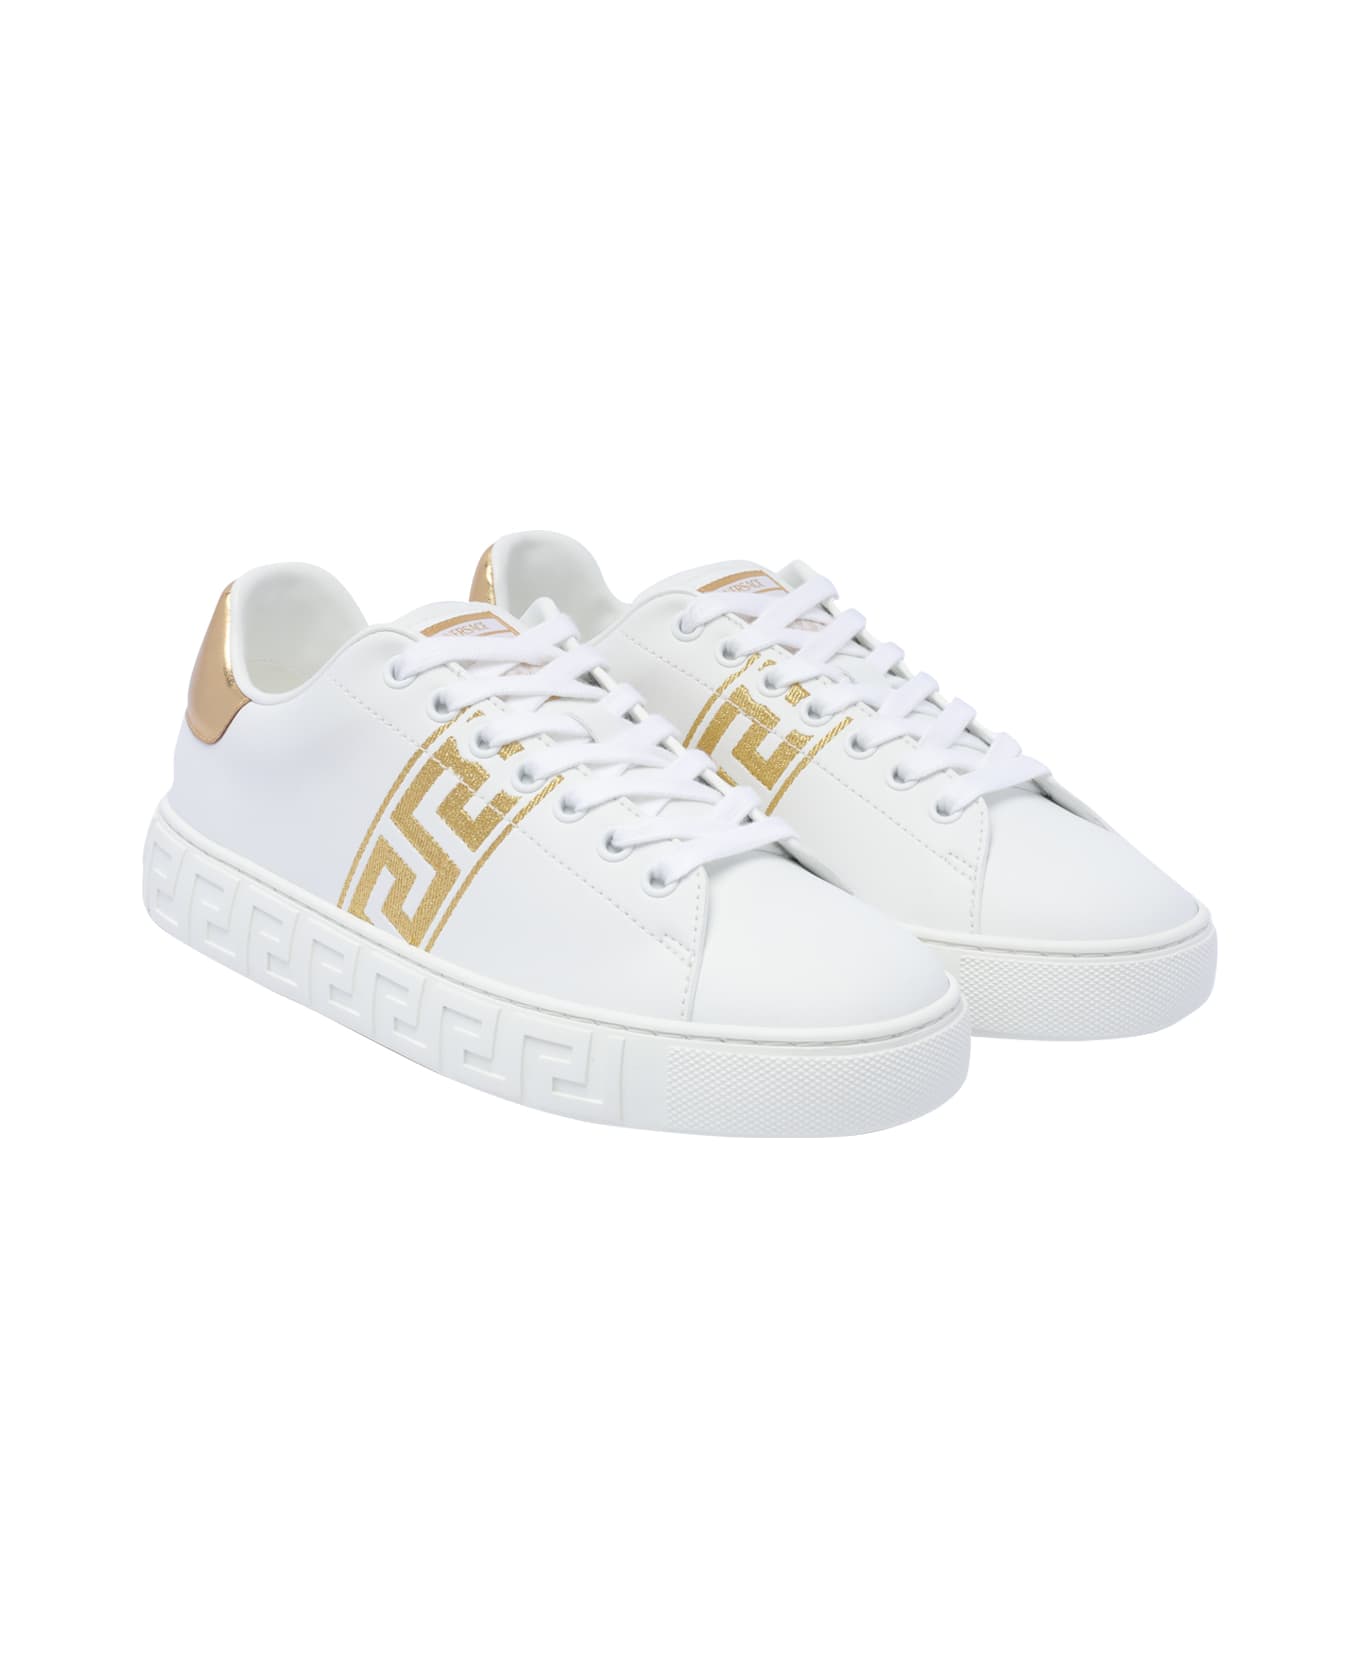 Versace Greca Embroidered Sneakers - White